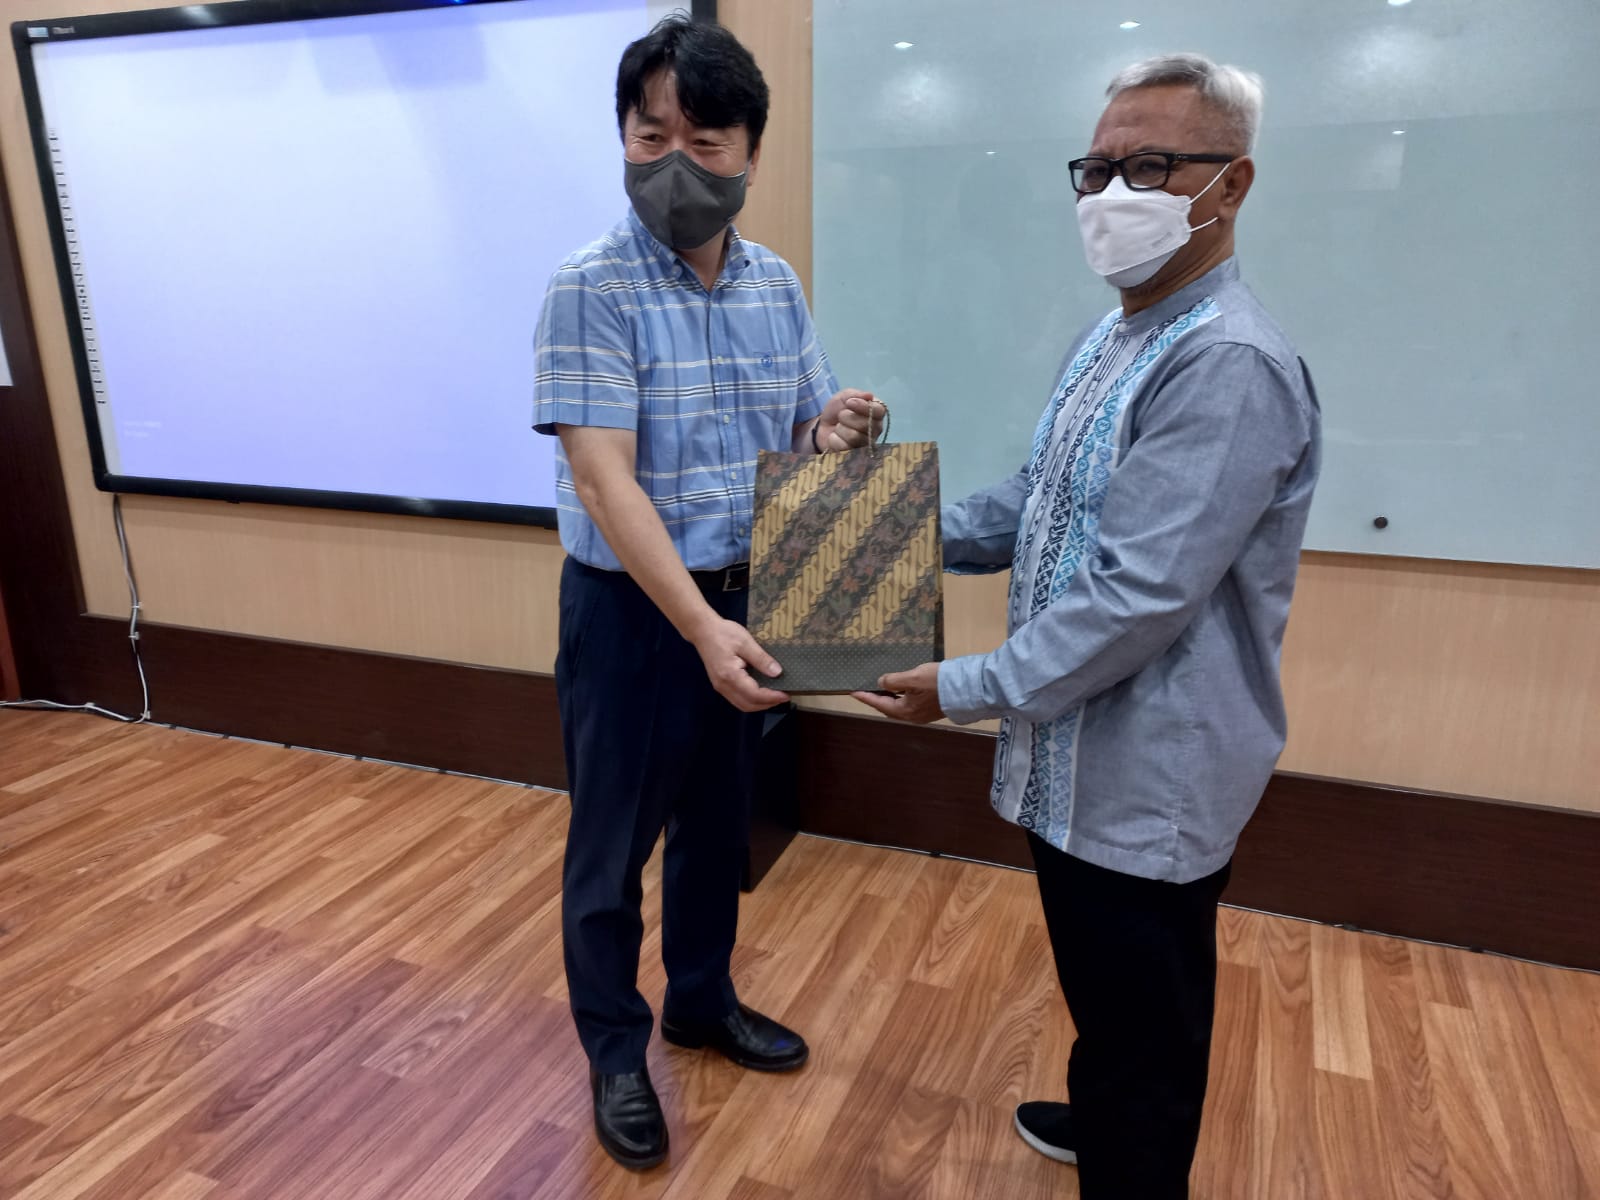 Head of the ITS Development Studies Department Dr. Arfan Fahmi SS MPd (right) when handing over a souvenir to the Chief Executive Officer of Arasoft Emeritus Prof. Hwang In Pyo PhD